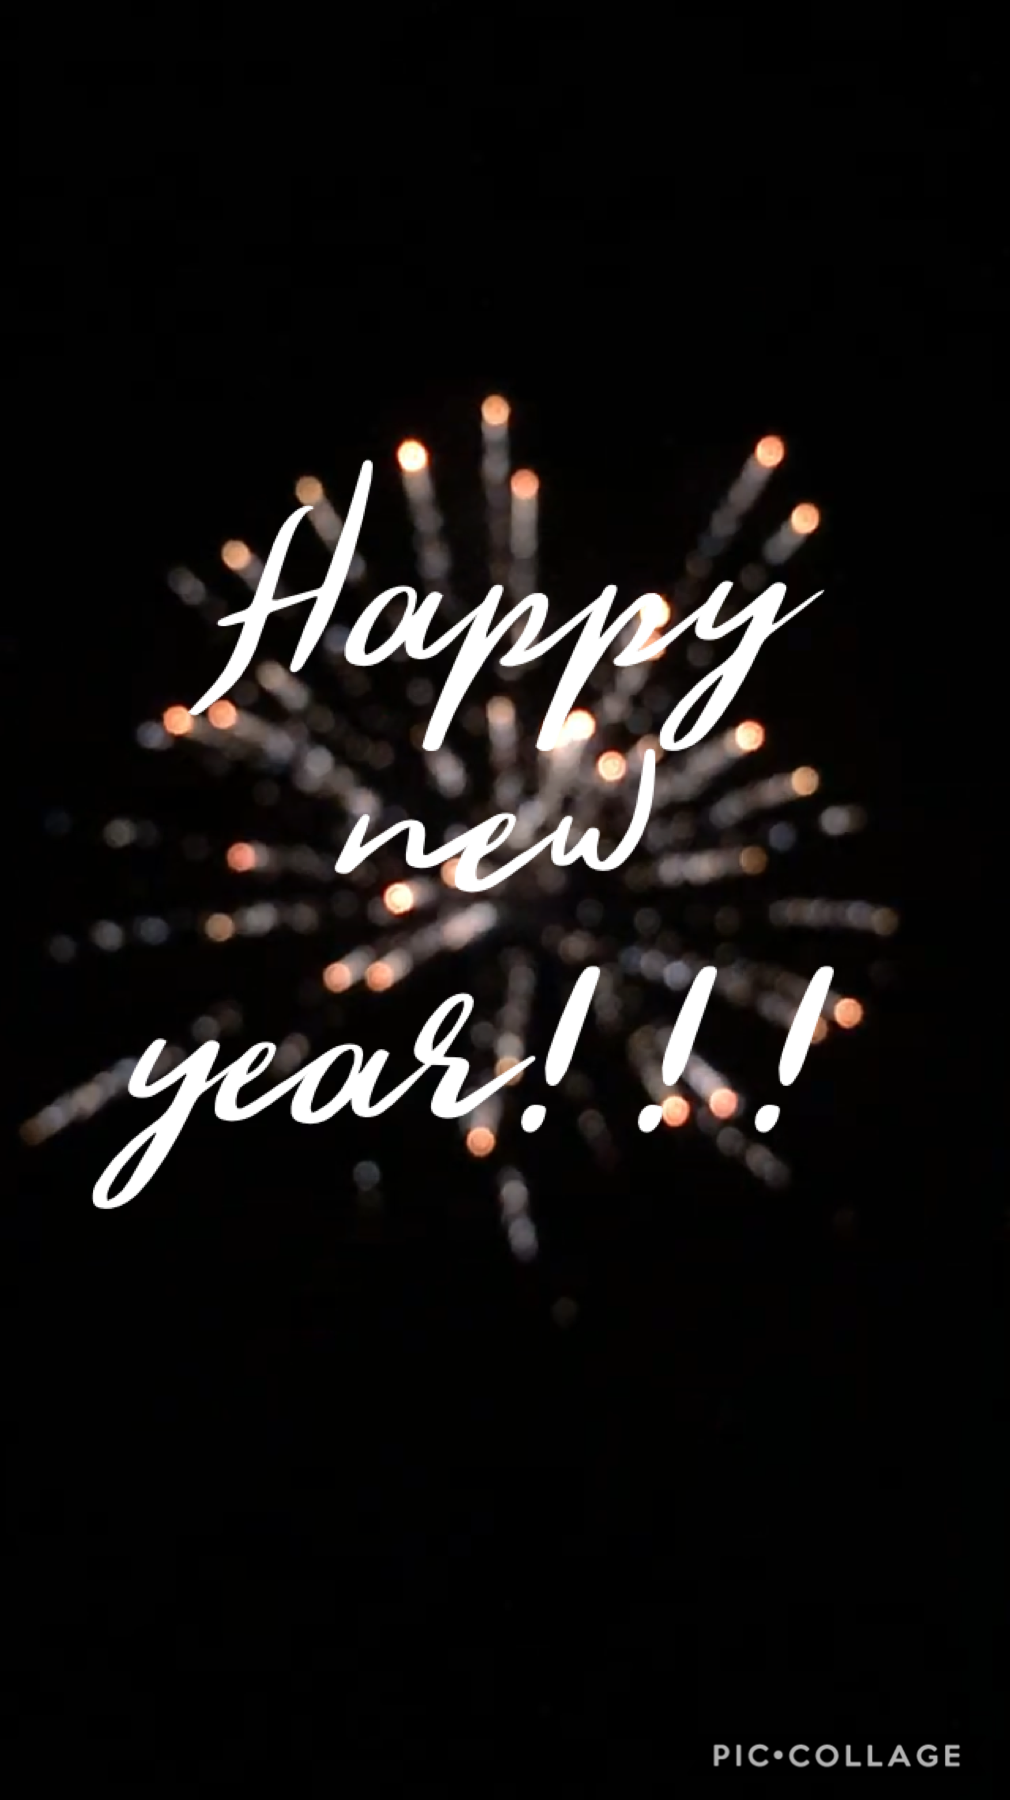 🥳tap🥳
Happy new year everyone!
2020 here we come!
In the comments tell me your goals for this year and the century!
Mine for this year are to join cross country and get ready for Varsity basketball
Mine for the century are to travel around Europe and to l